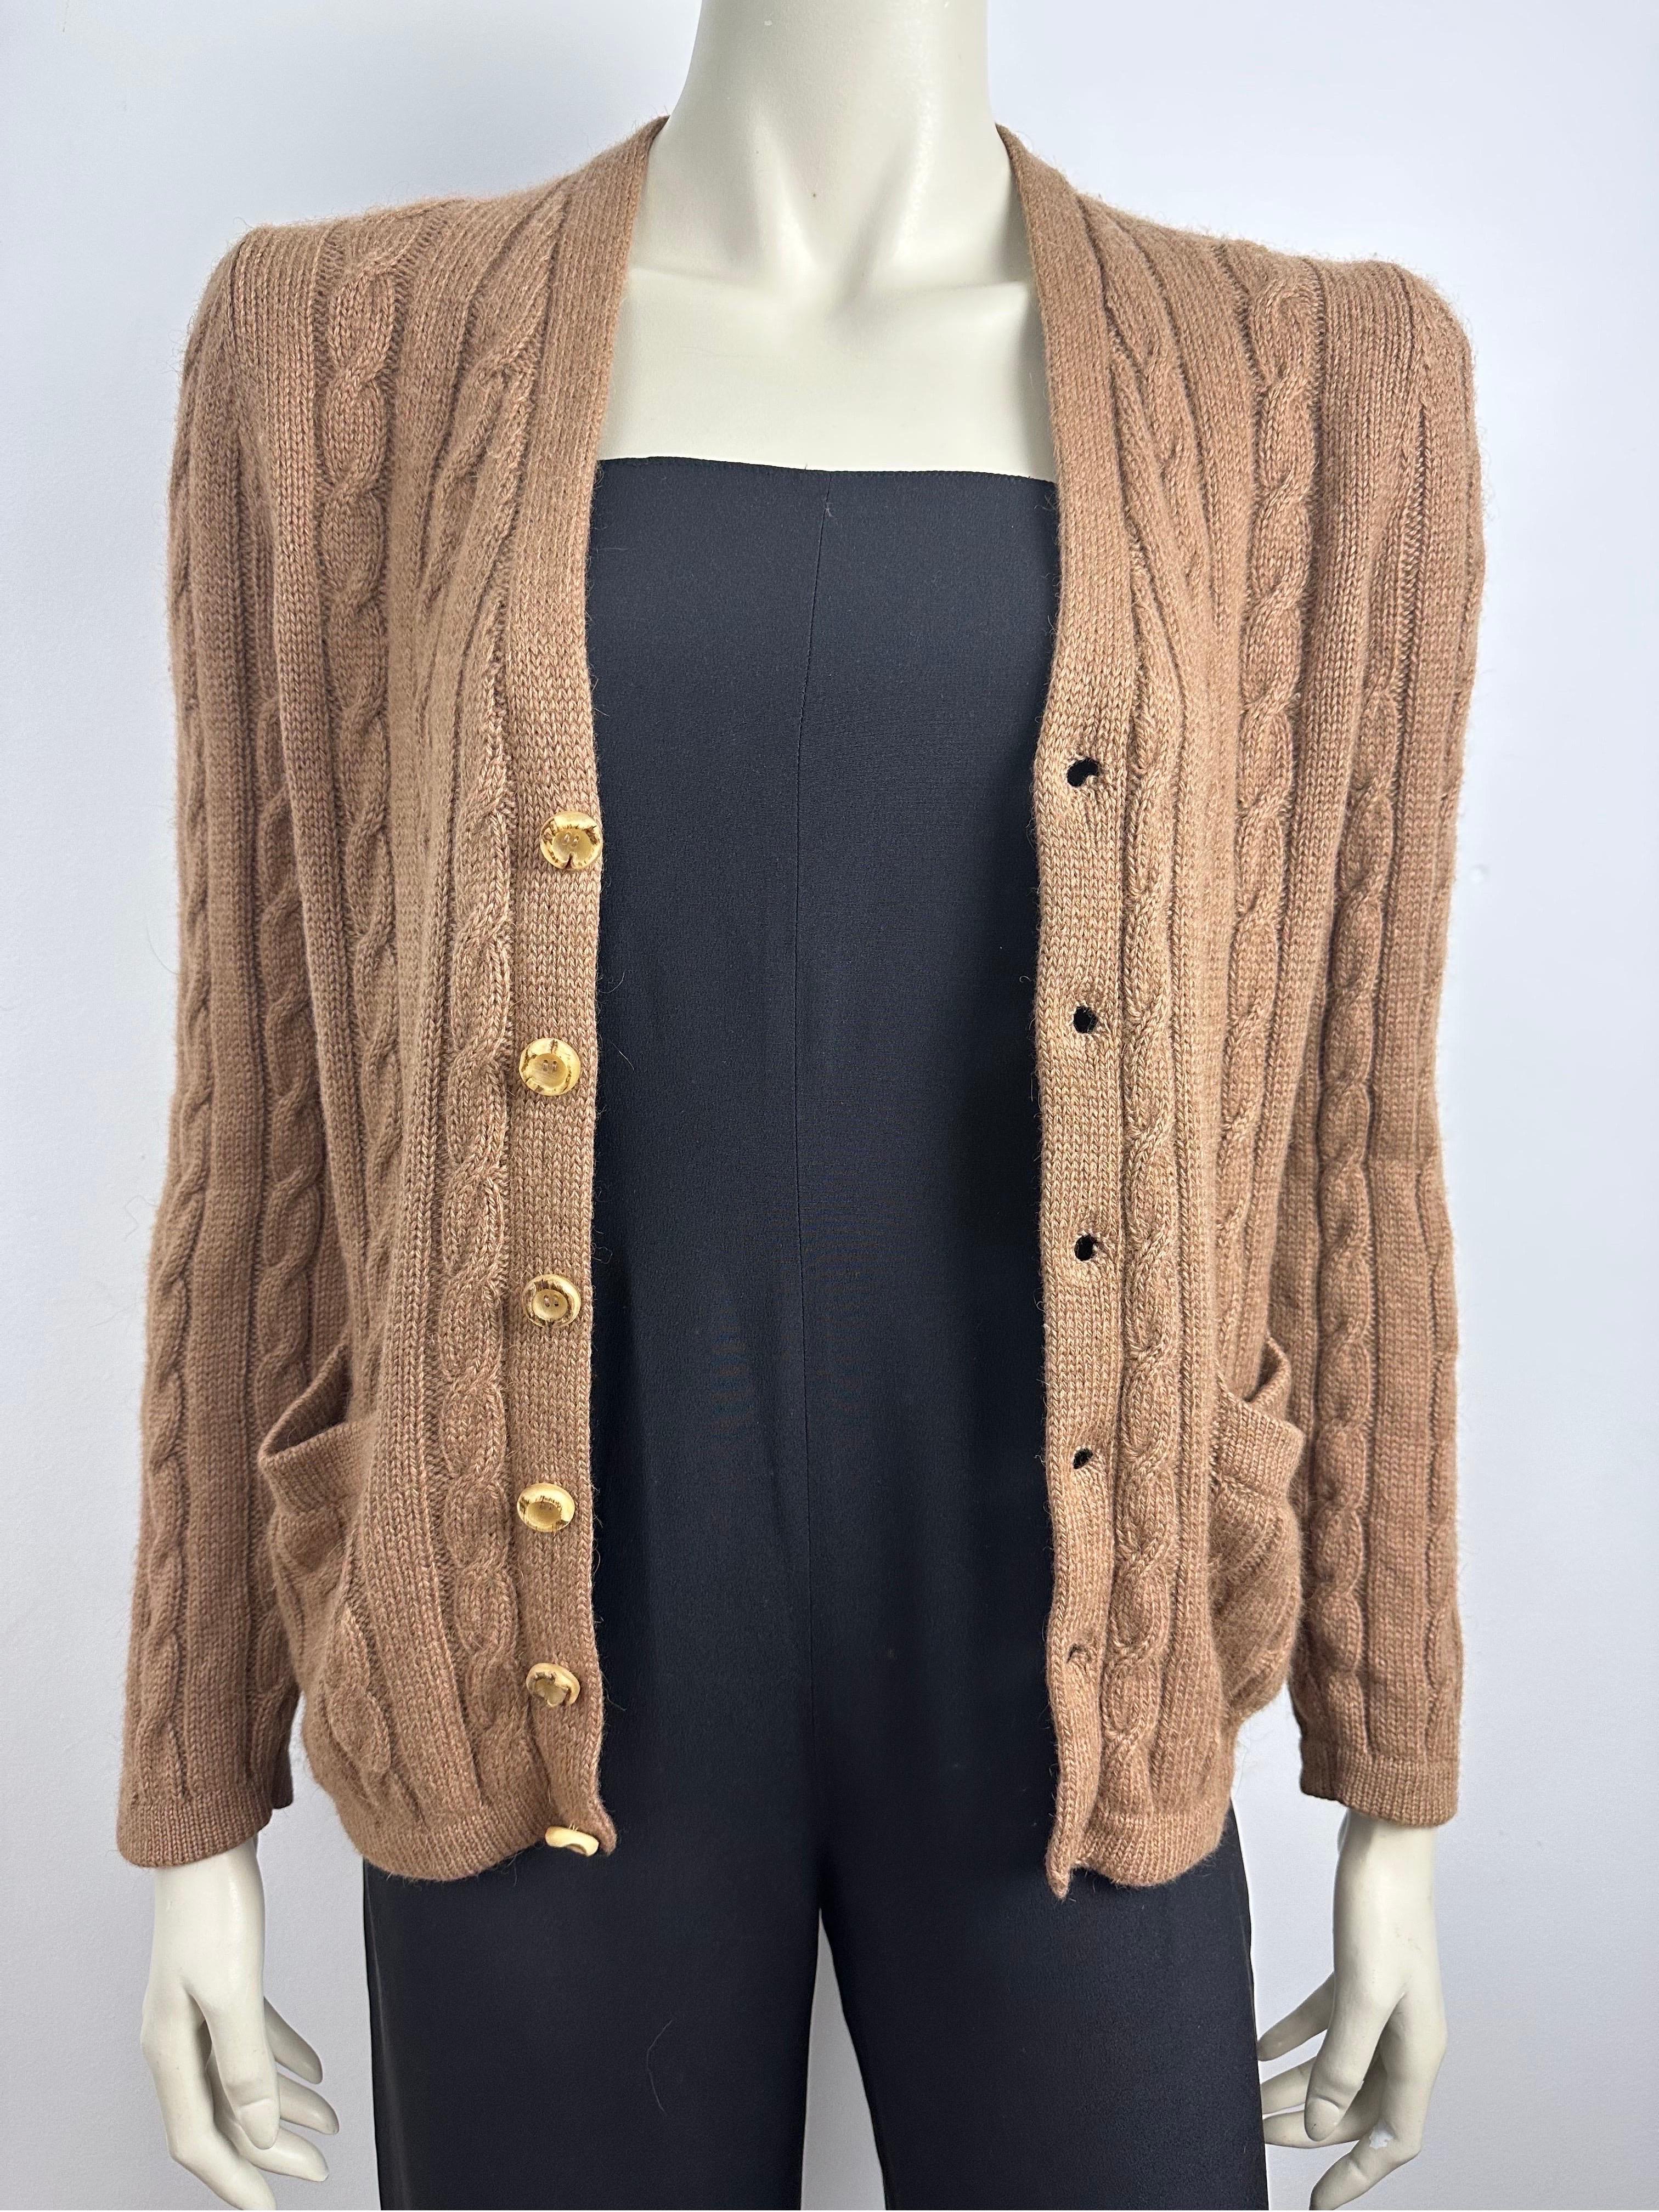 Vintage 1970s Yves saint Laurent cardigan
In camel wool
Twisted, long sleeves, V-neckline, natural horn buttons.
Small open pockets on bottom of cardigan
Made in Italy
Size 2, 
shoulders 40cm
Chest width 46cm
Length 60cm, sleeves 60cm
In very good